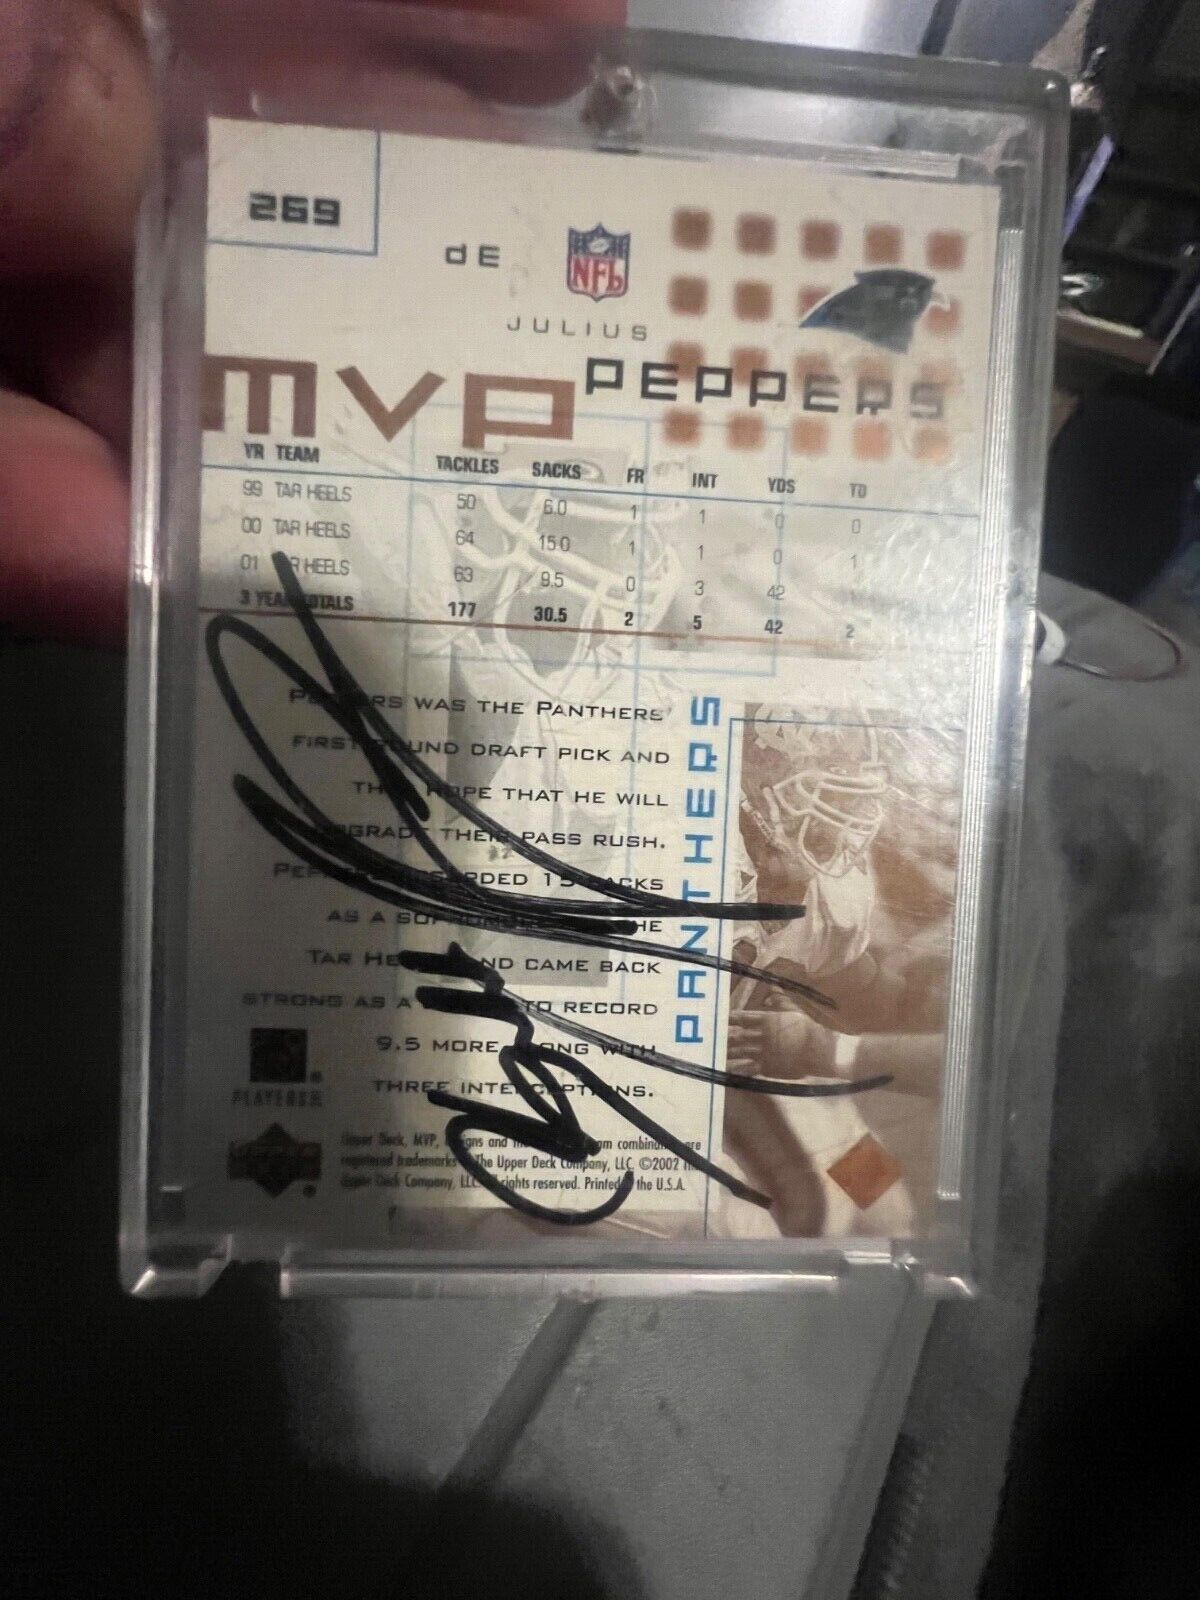  2002 AUTOGRAPHED UPPERDECK MVP JULIUS PEPPERS CARD #269. ONE OF A KIND